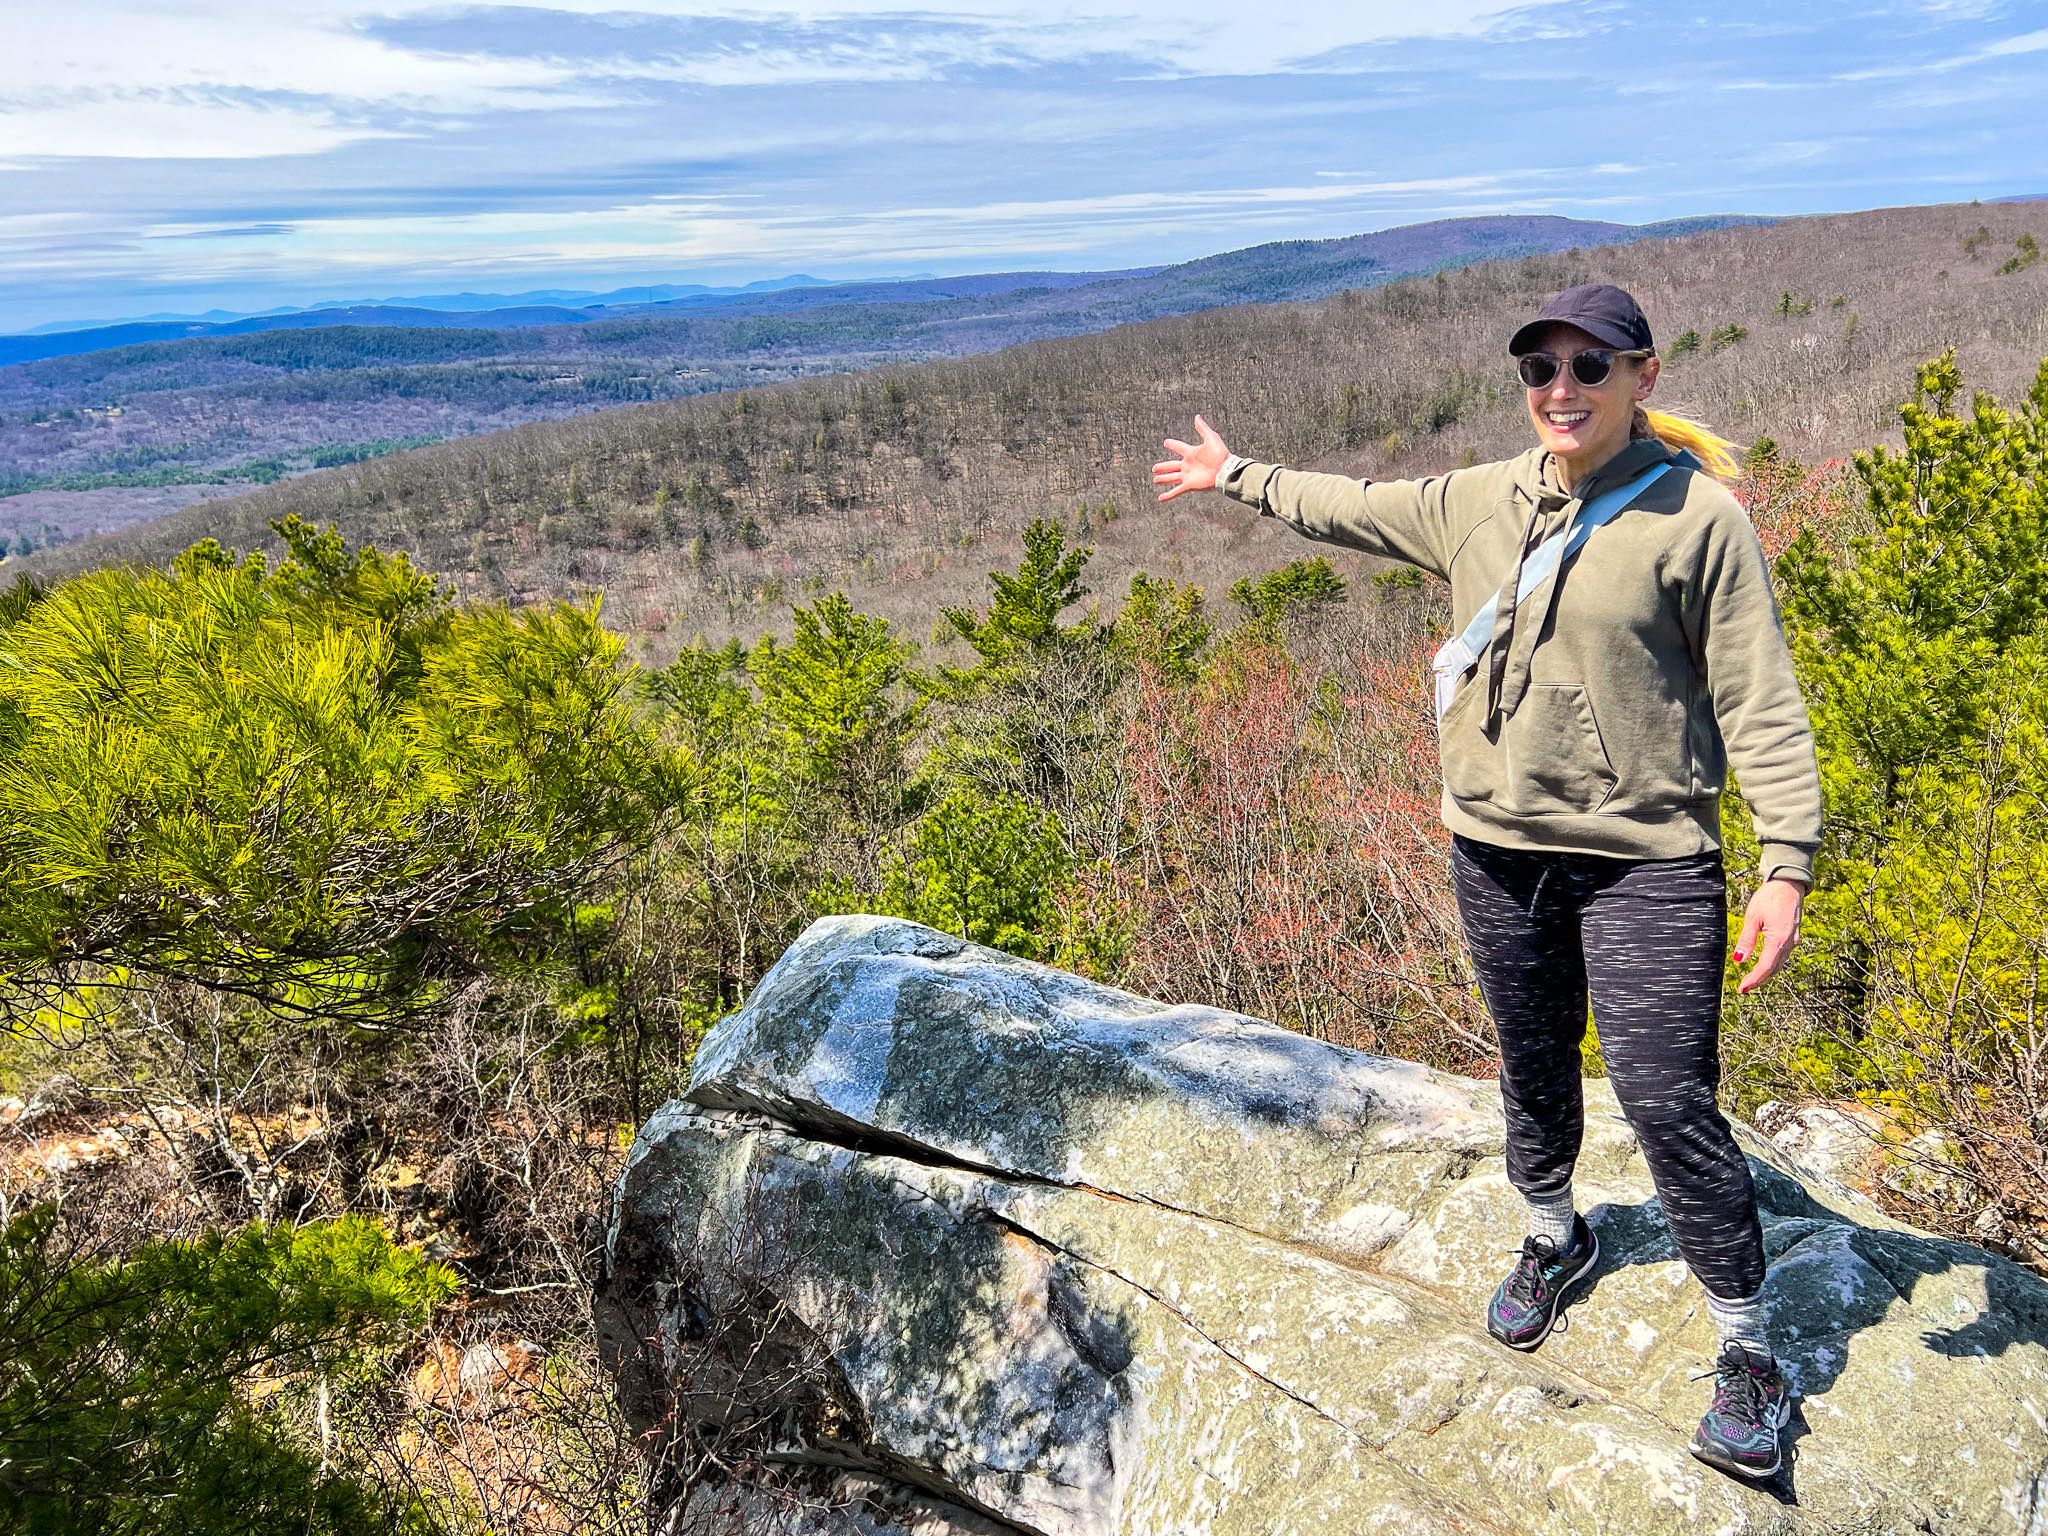 merry-at-top-of-monument-mountain-great-barrington